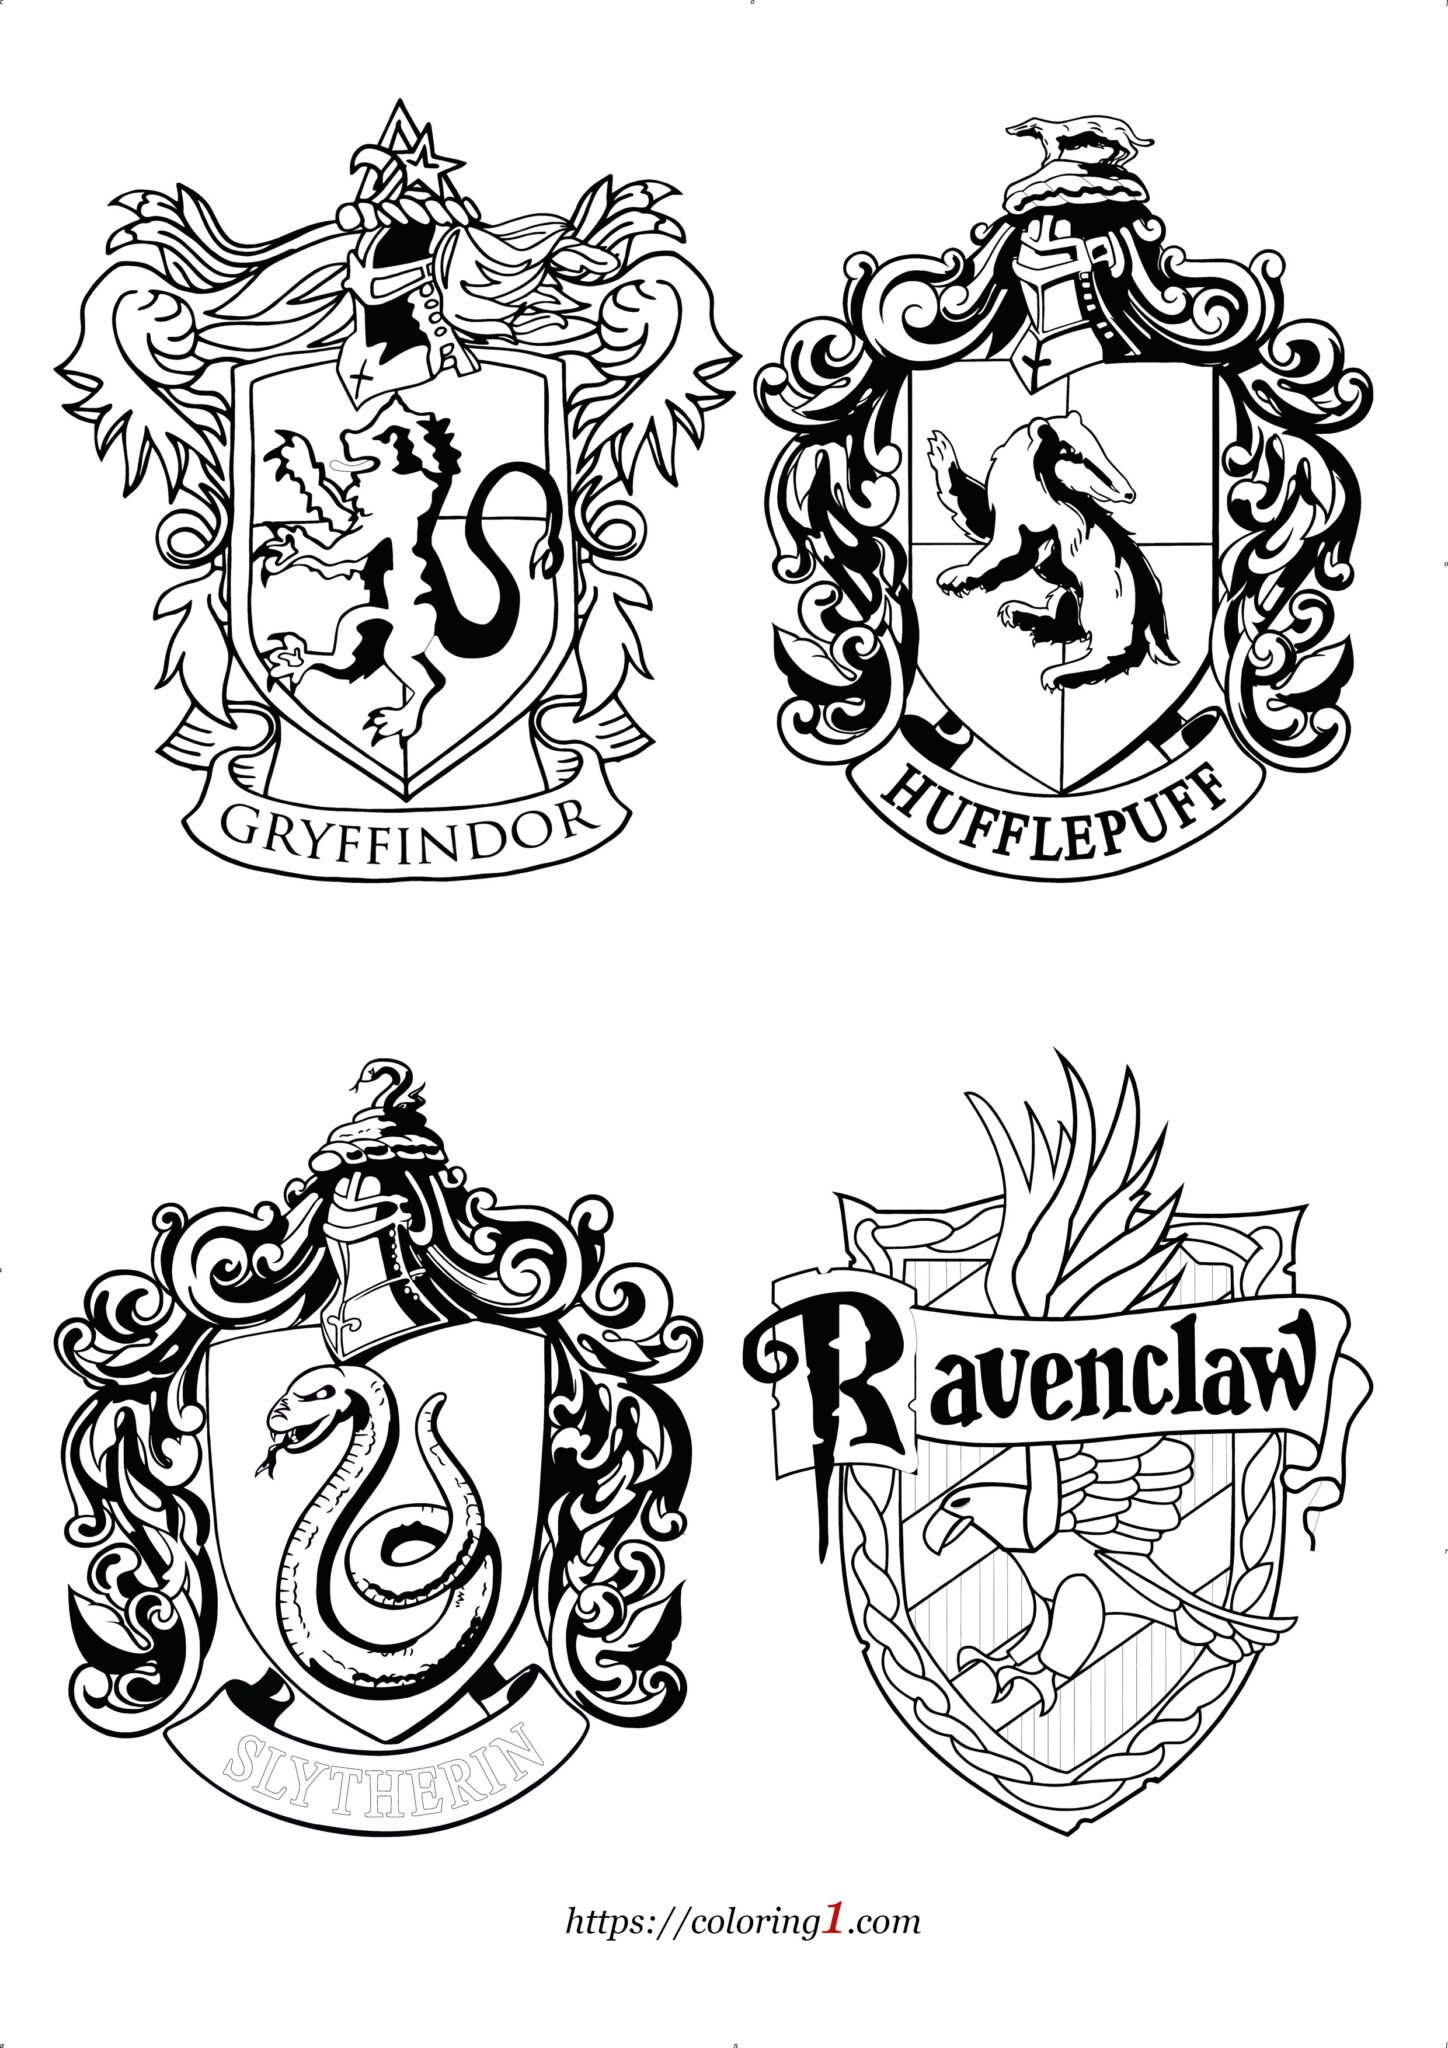 Harry Potter House Crests Coloring Pages 2 Free Coloring Sheets (2021)